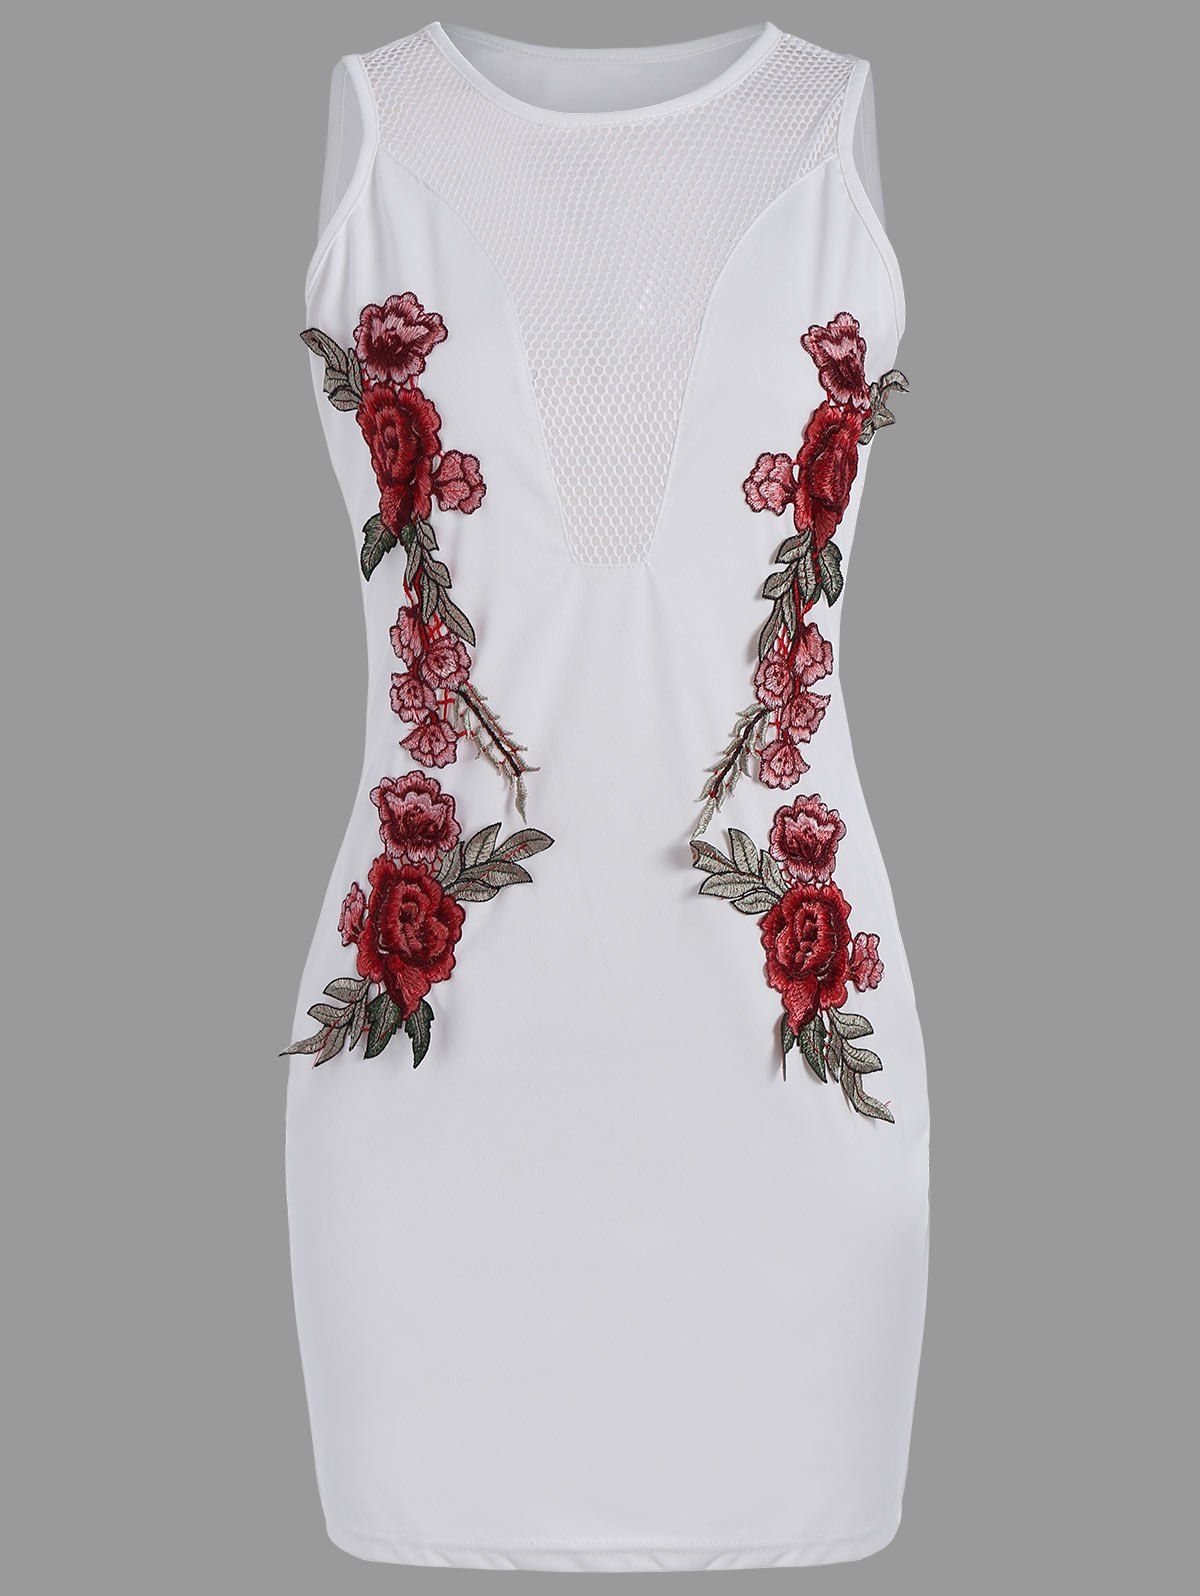 Hot Mesh Insert Floral Embroidered Bodycon Mini Dress  